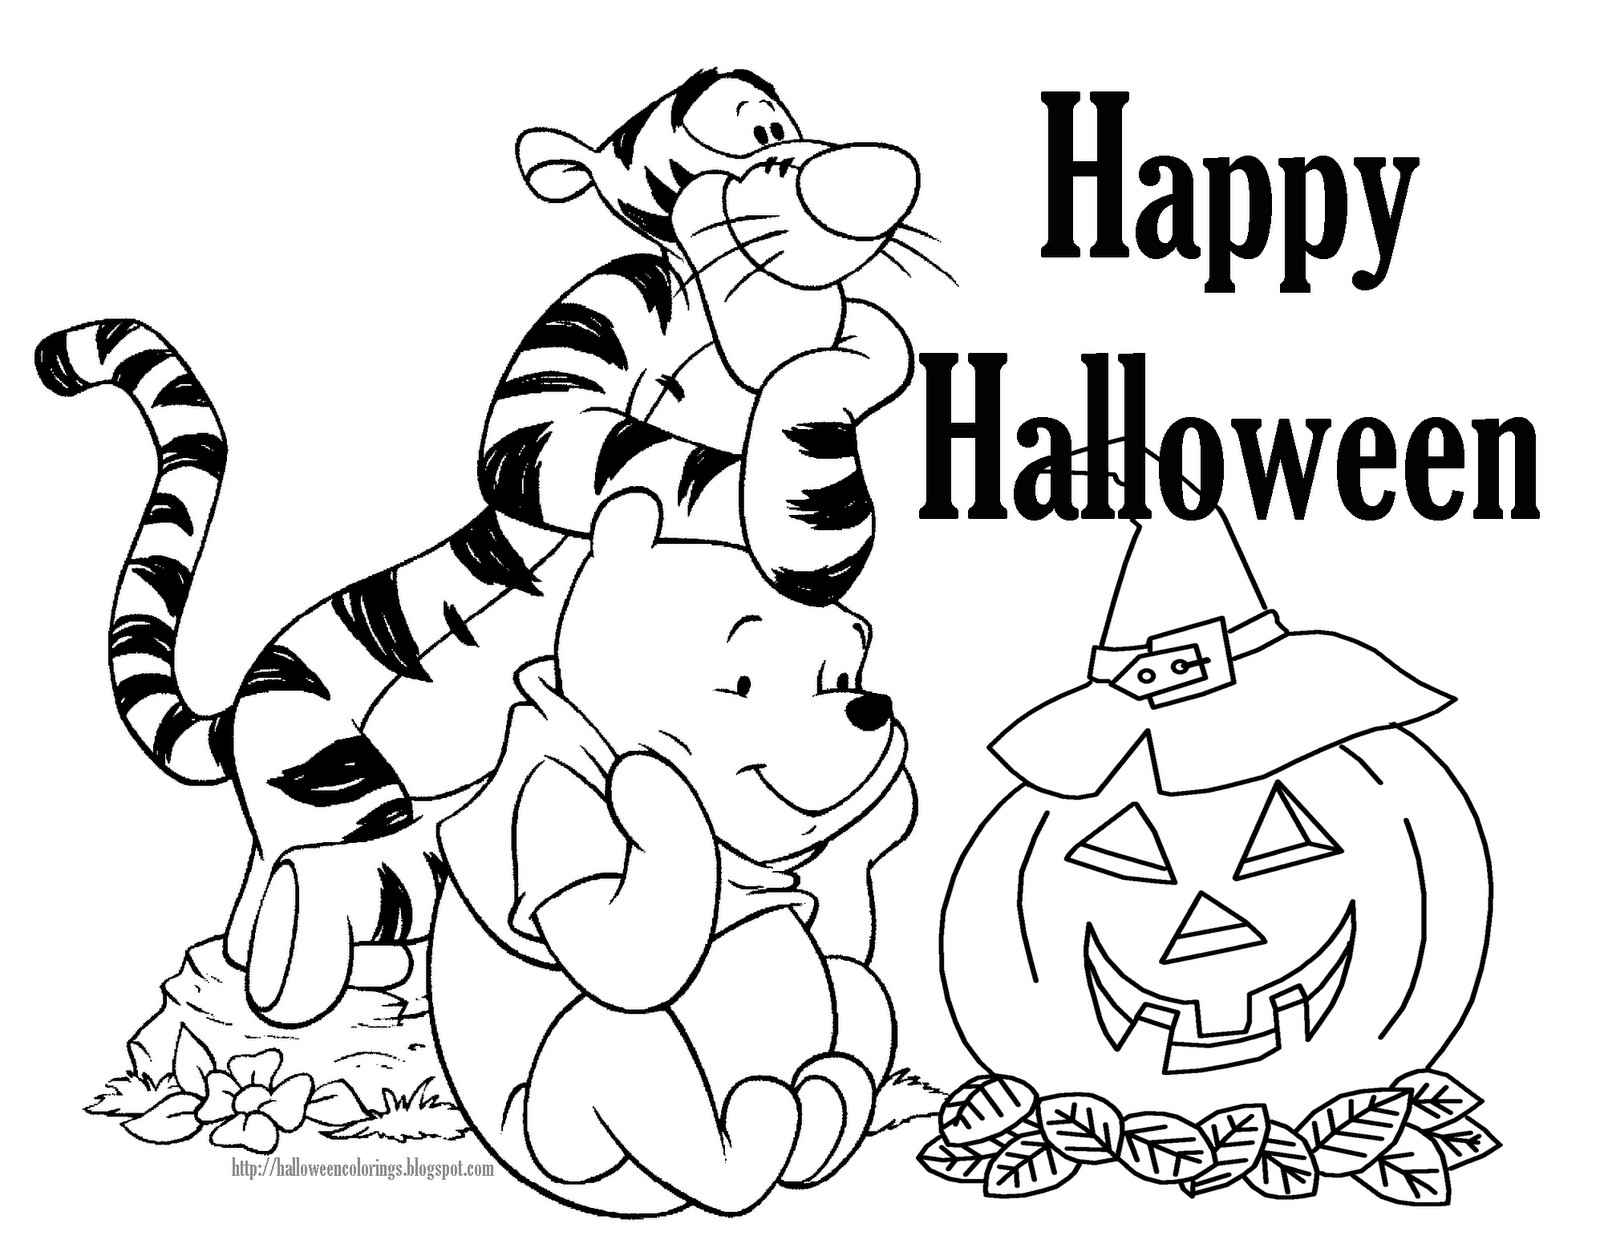 Free Printable Halloween Coloring Pages
 Halloween Coloring Pages – Free Printable Minnesota Miranda